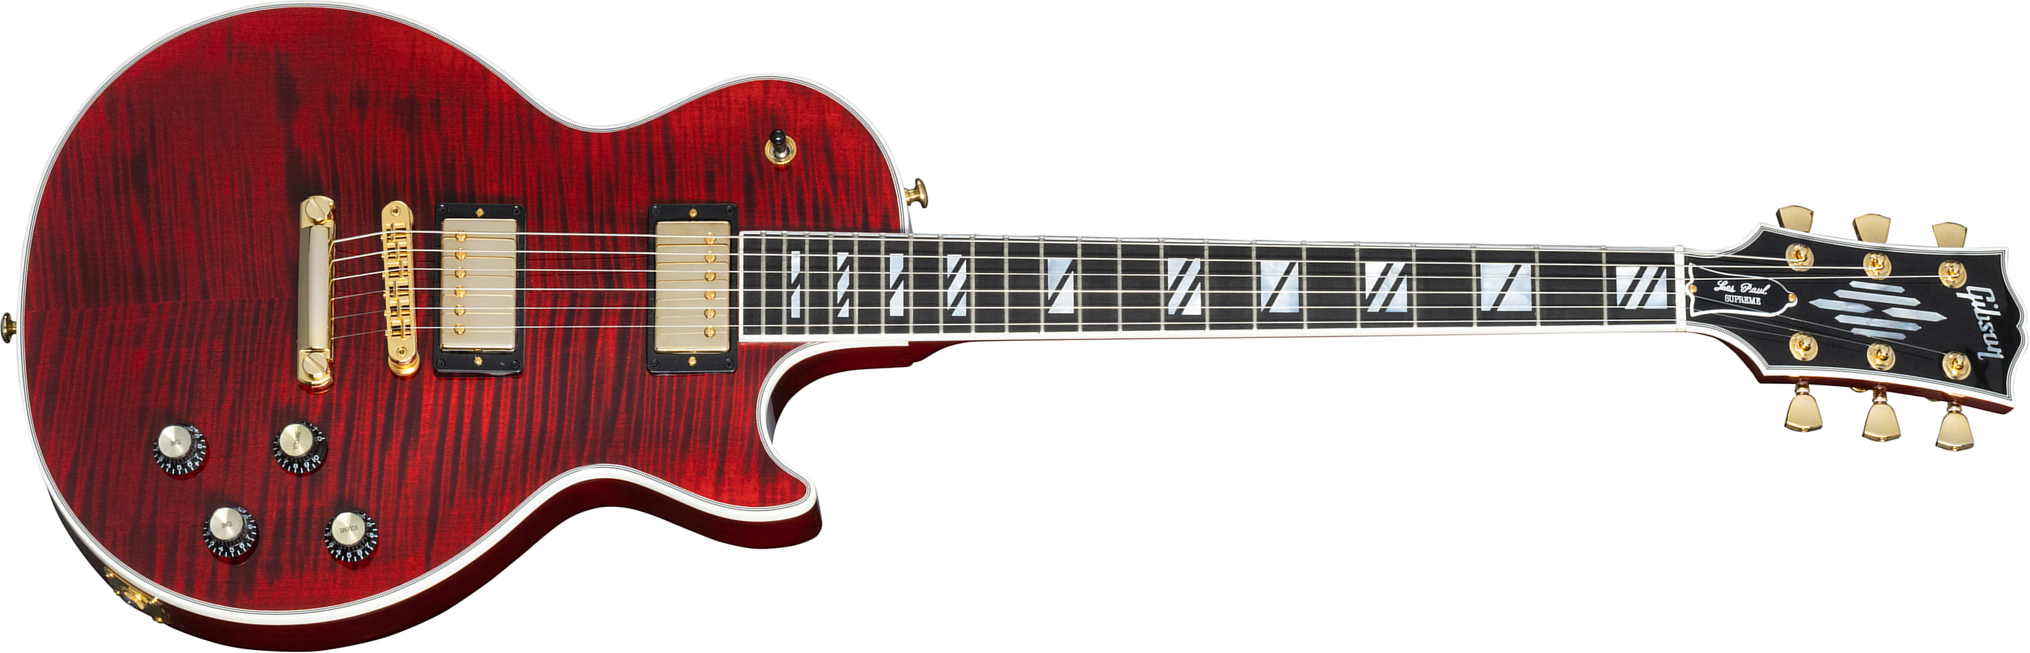 Gibson Les Paul Supreme 2023 2h Ht Eb - Wine Red - Single cut electric guitar - Main picture